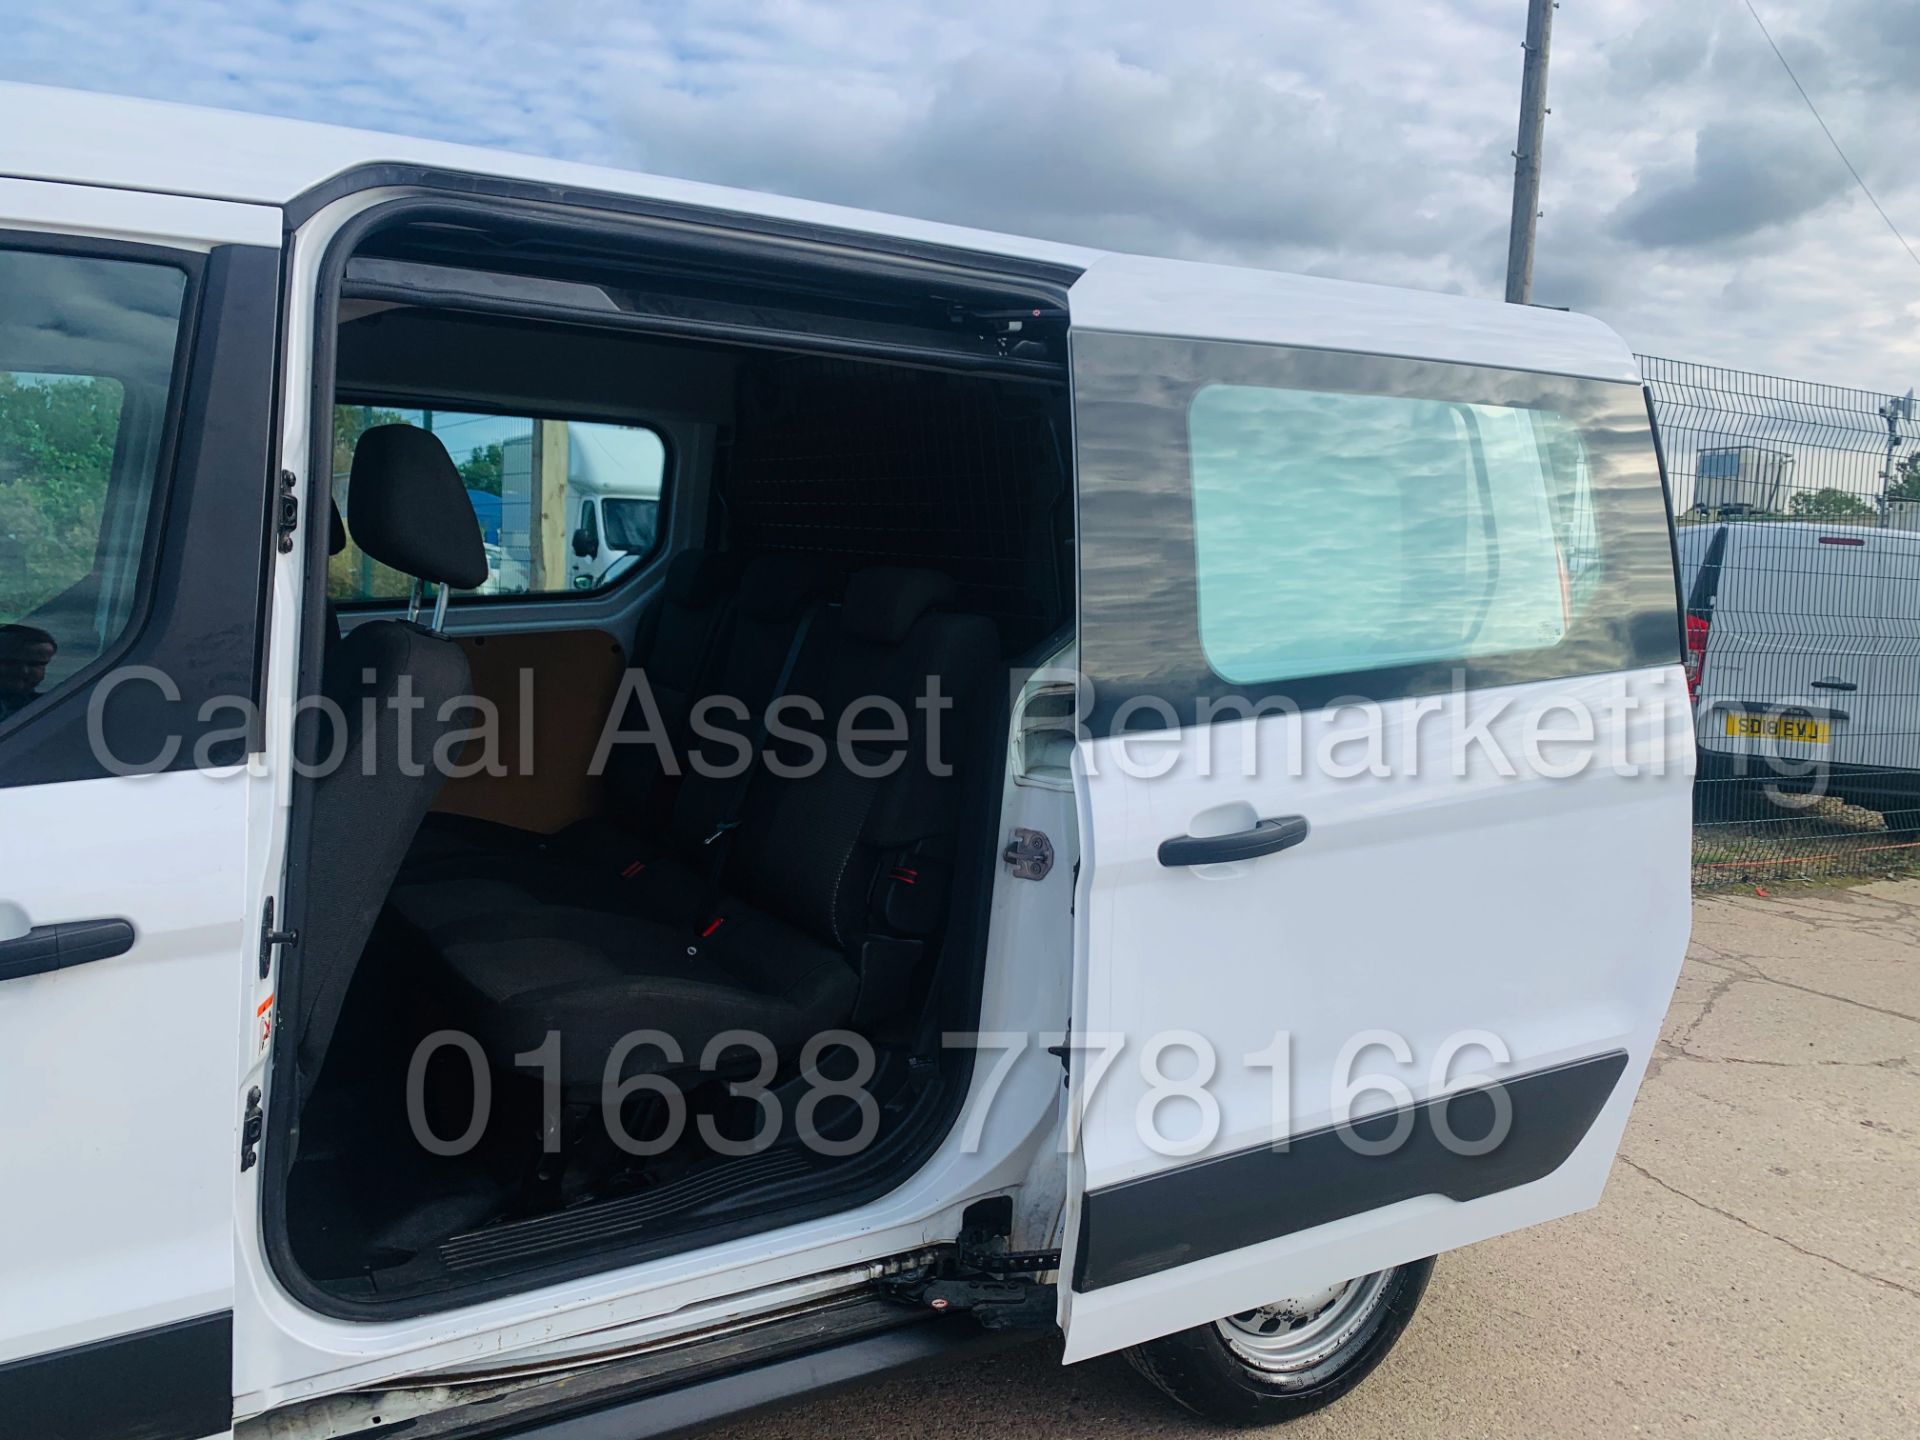 (On Sale) FORD TRANSIT CONNECT *LWB - 5 SEATER CREW VAN* (67 REG - EURO 6) 1.5 TDCI *A/C* (1 OWNER) - Image 21 of 40